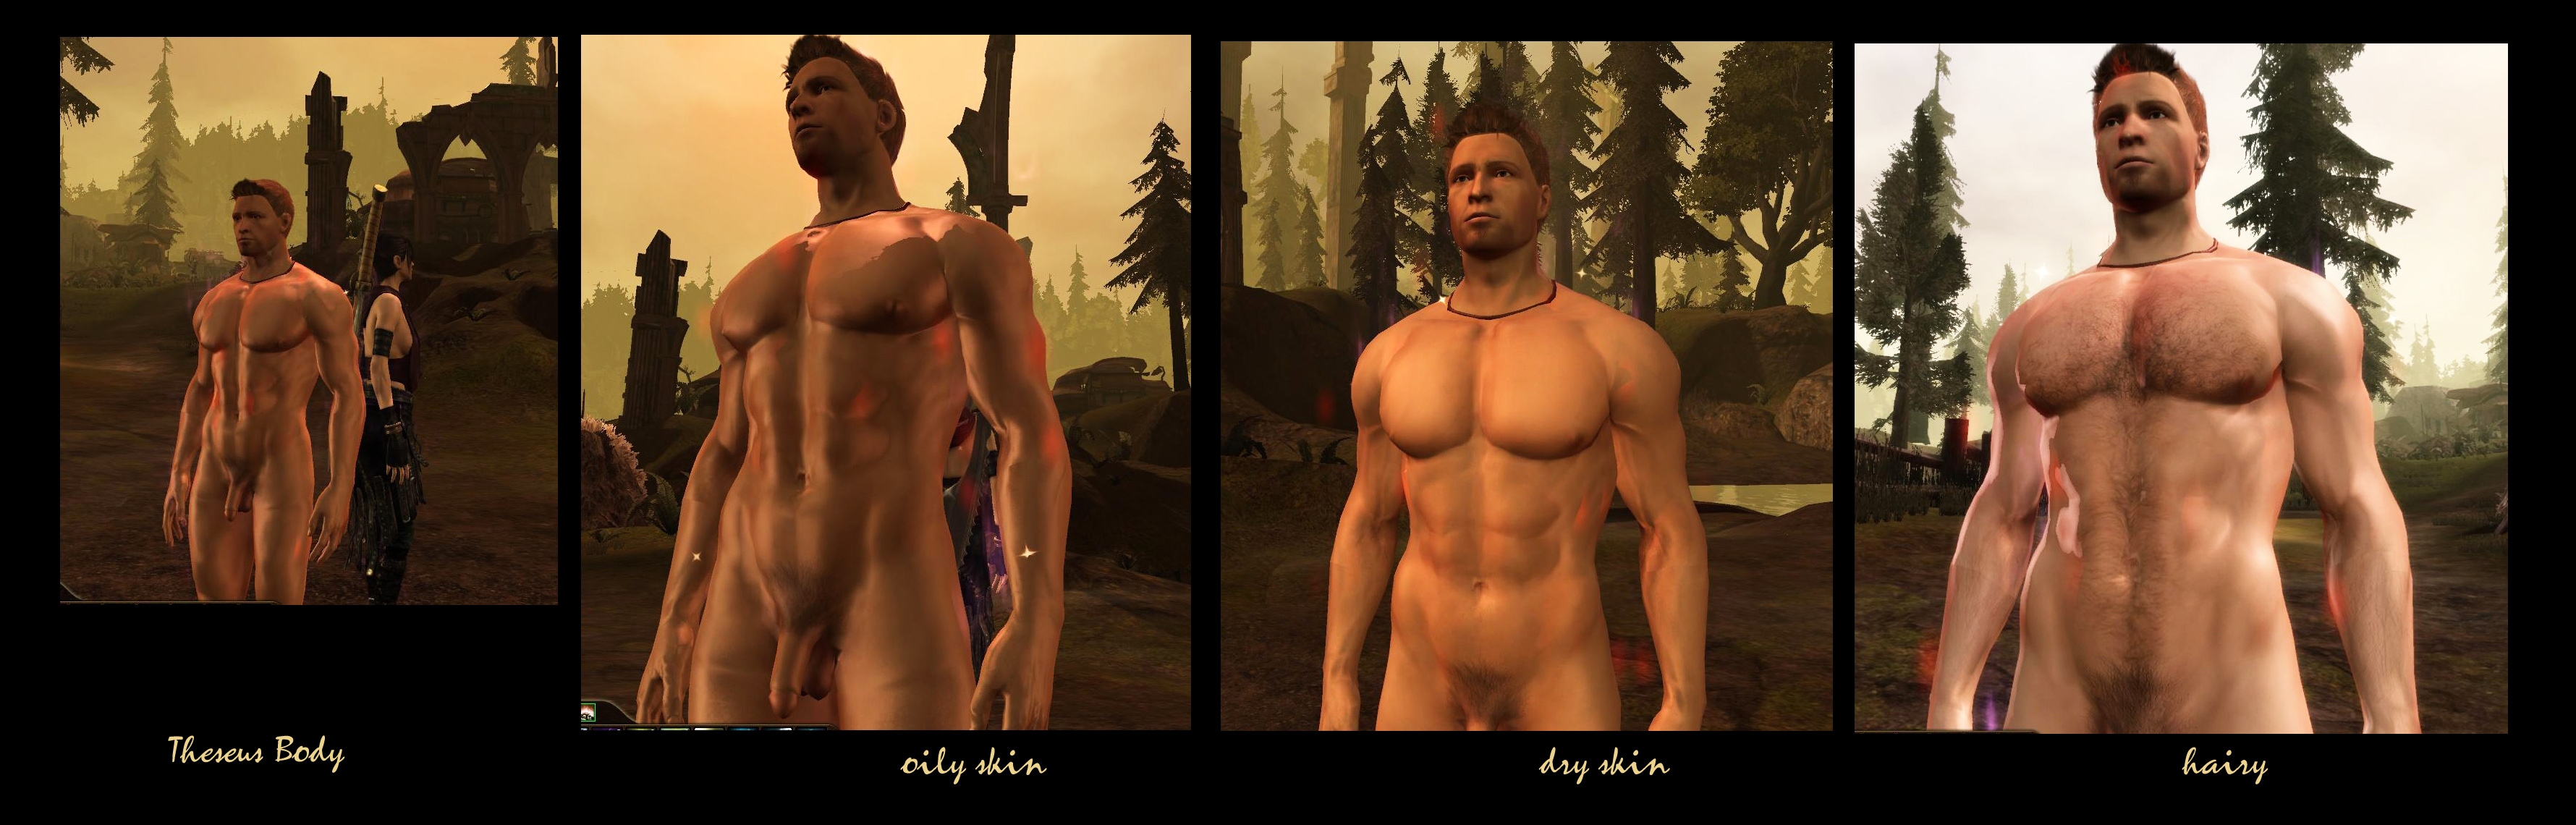 catherine cendana recommends dragon age inquisition nude mods pic